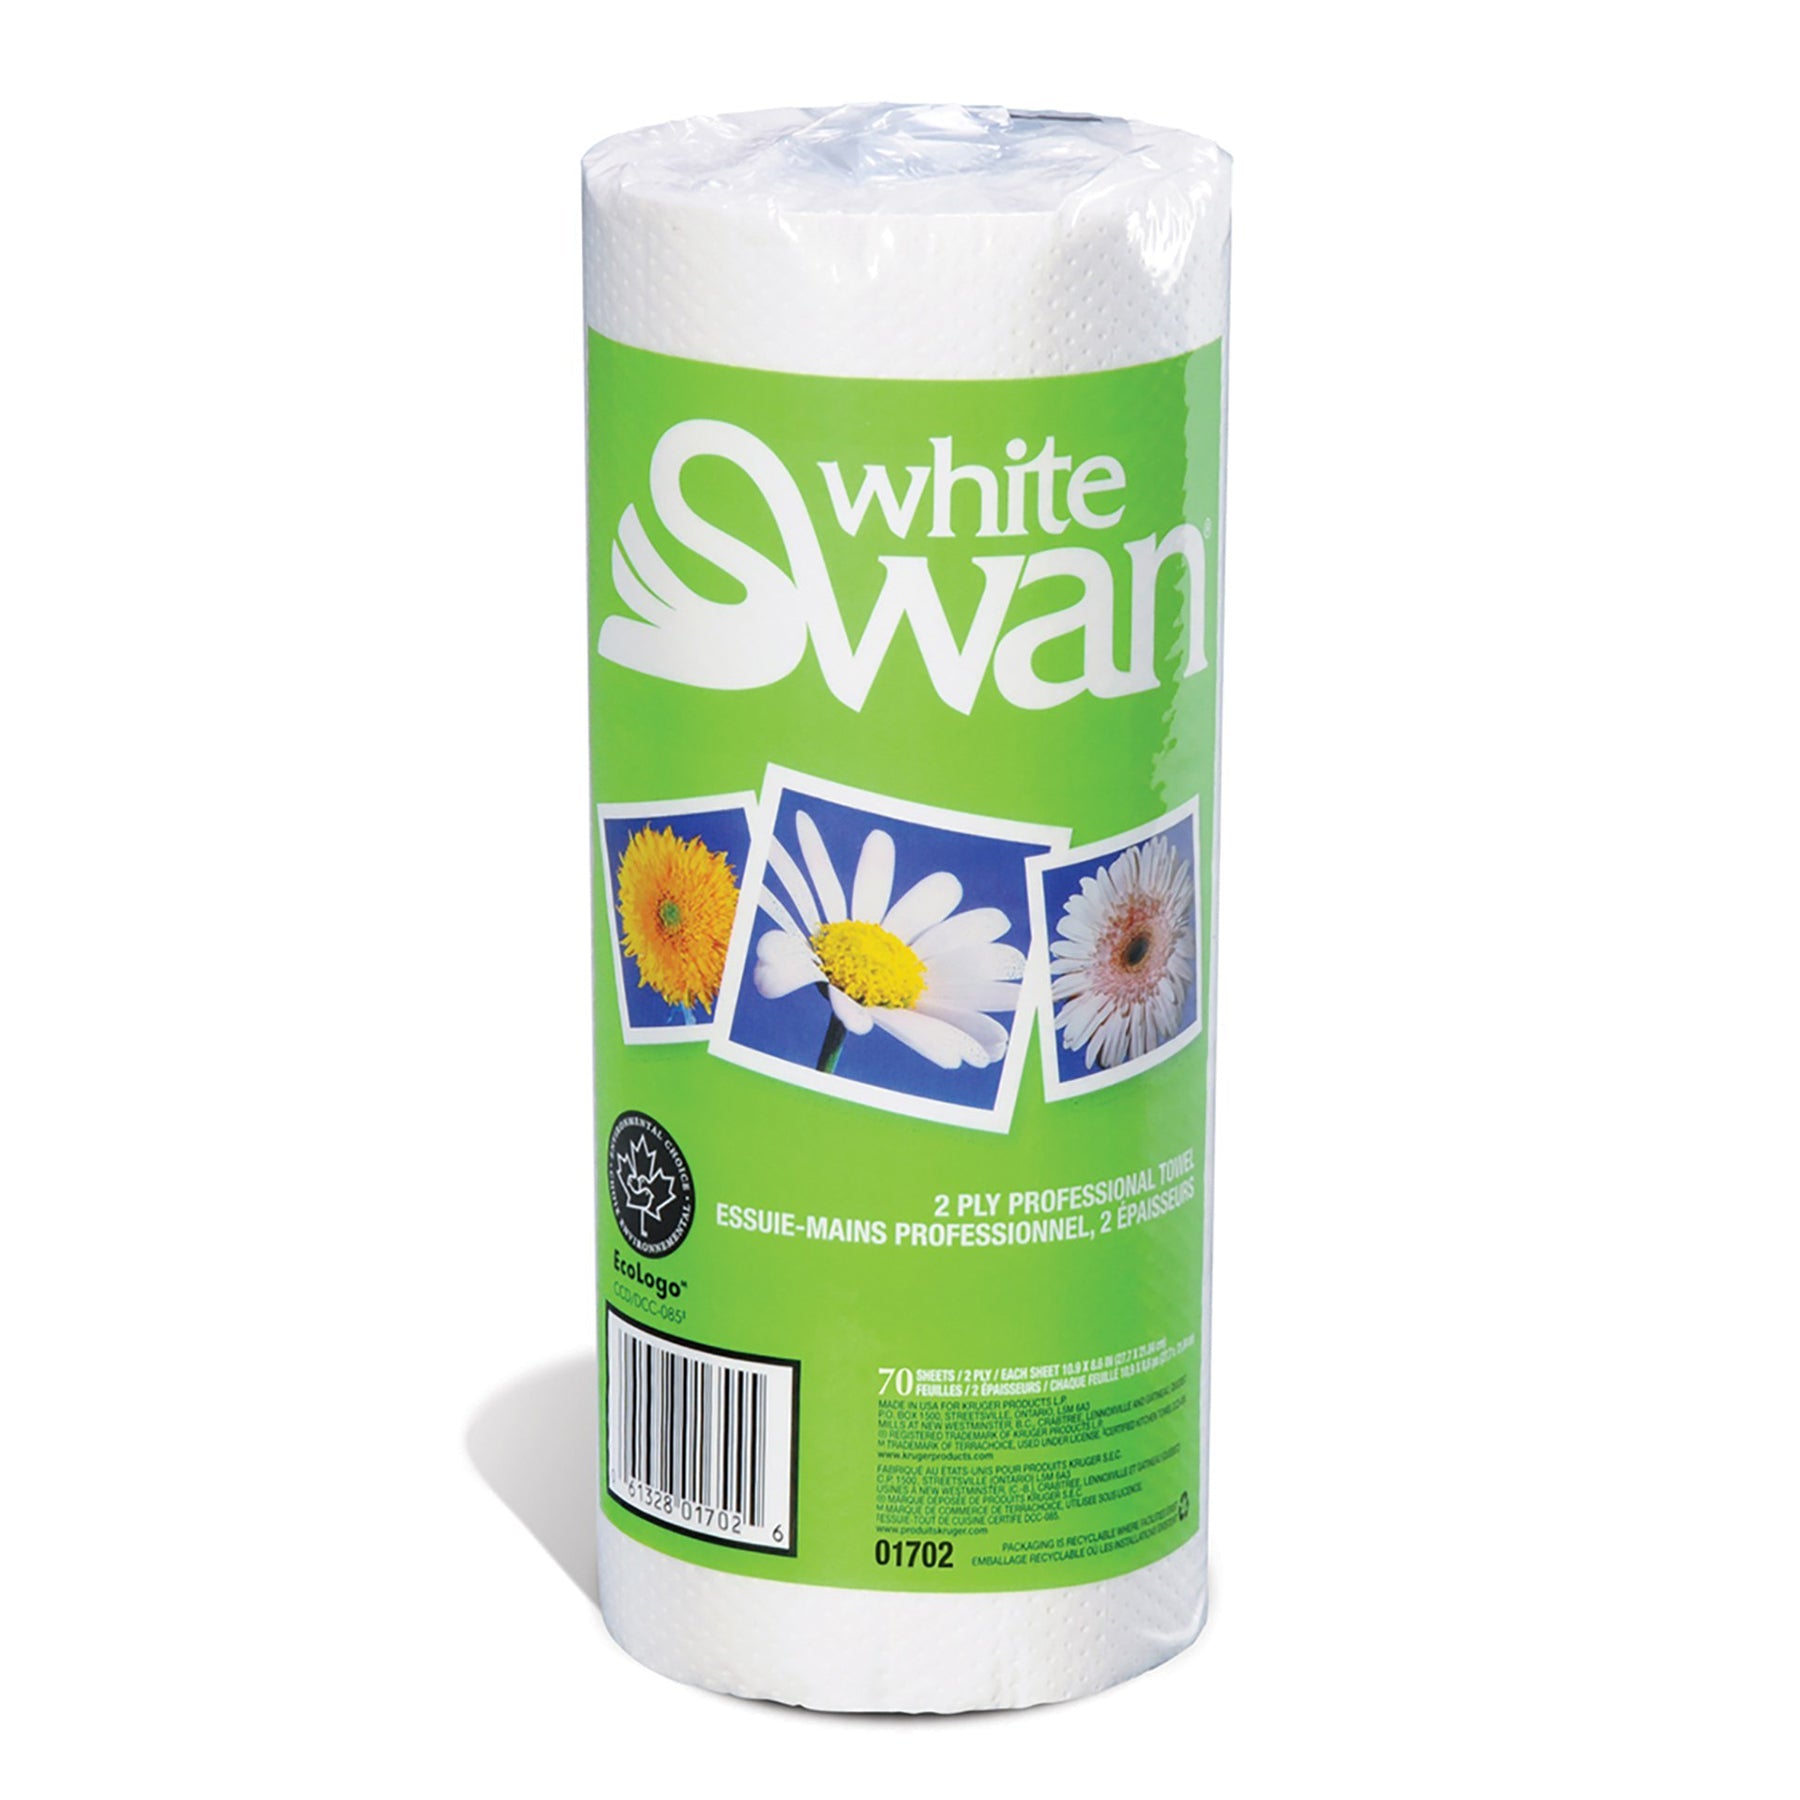 White Swan Professionnal Towels 2 Ply 70 Sheets